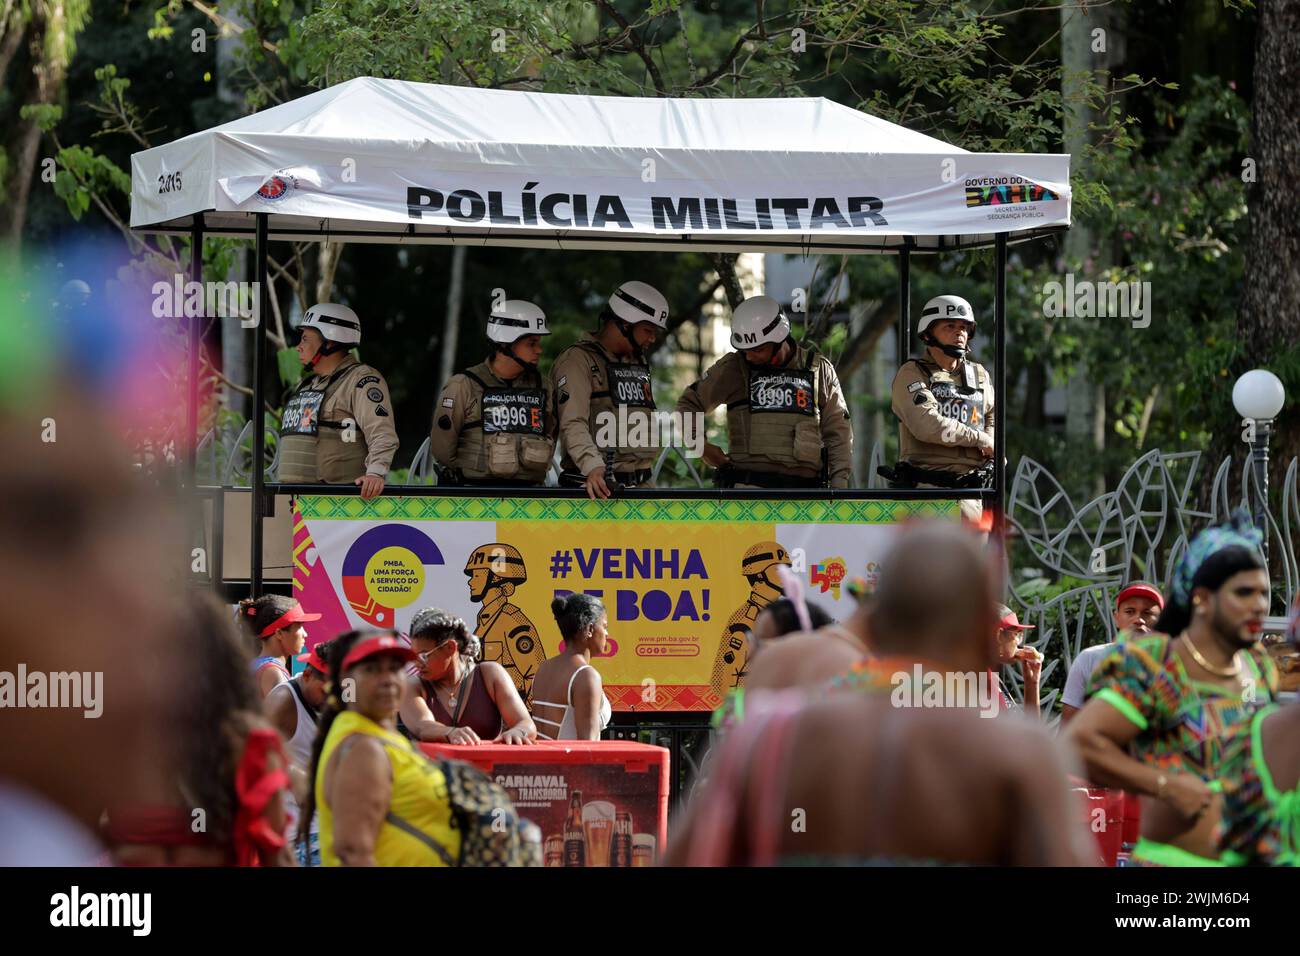 Bahia military police at carnival salvador, bahia, brazil - february 10, 2024: Bahia military police officers seen during the carnival in the city of Salvador. SALVADOR BAHIA BRAZIL Copyright: xJoaxSouzax 080224JOA4315321 Stock Photo